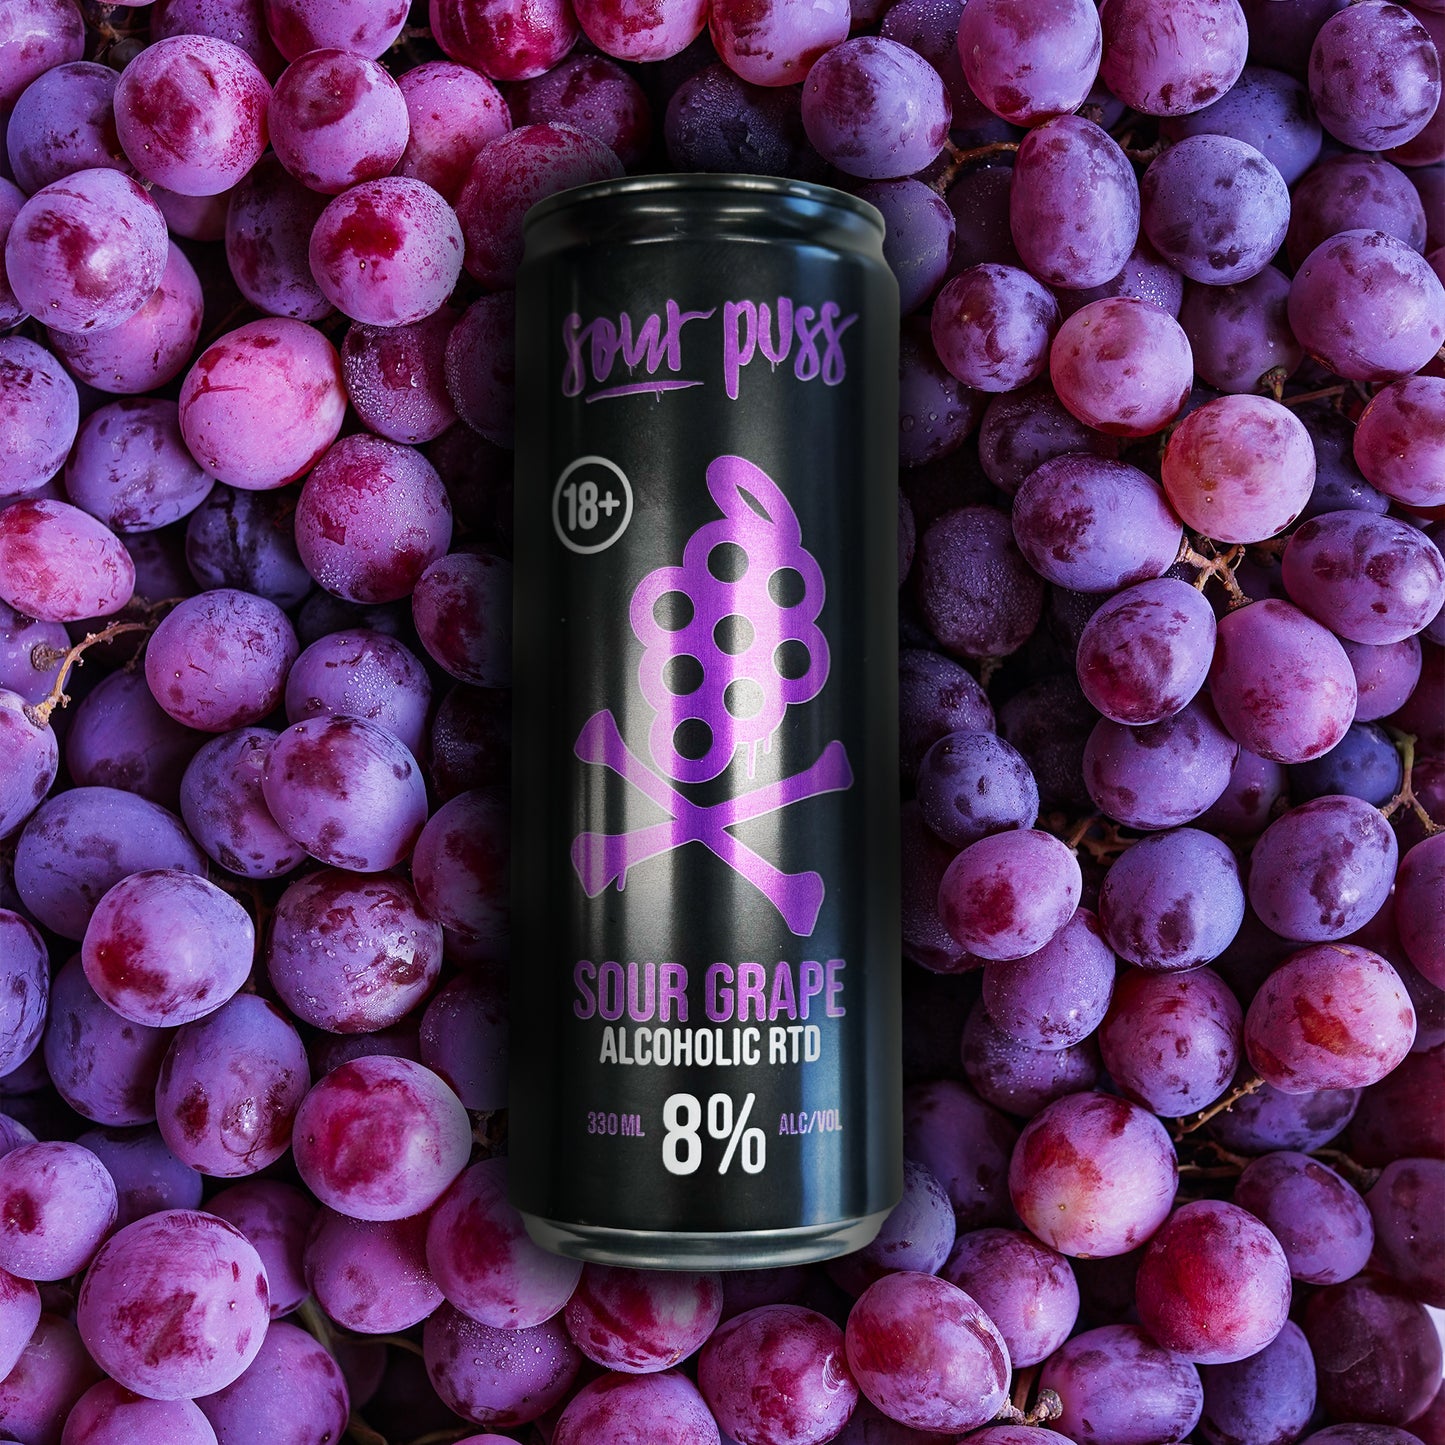 Sour Puss RTD 3 X 24 330ml Cans - 80Proof online 